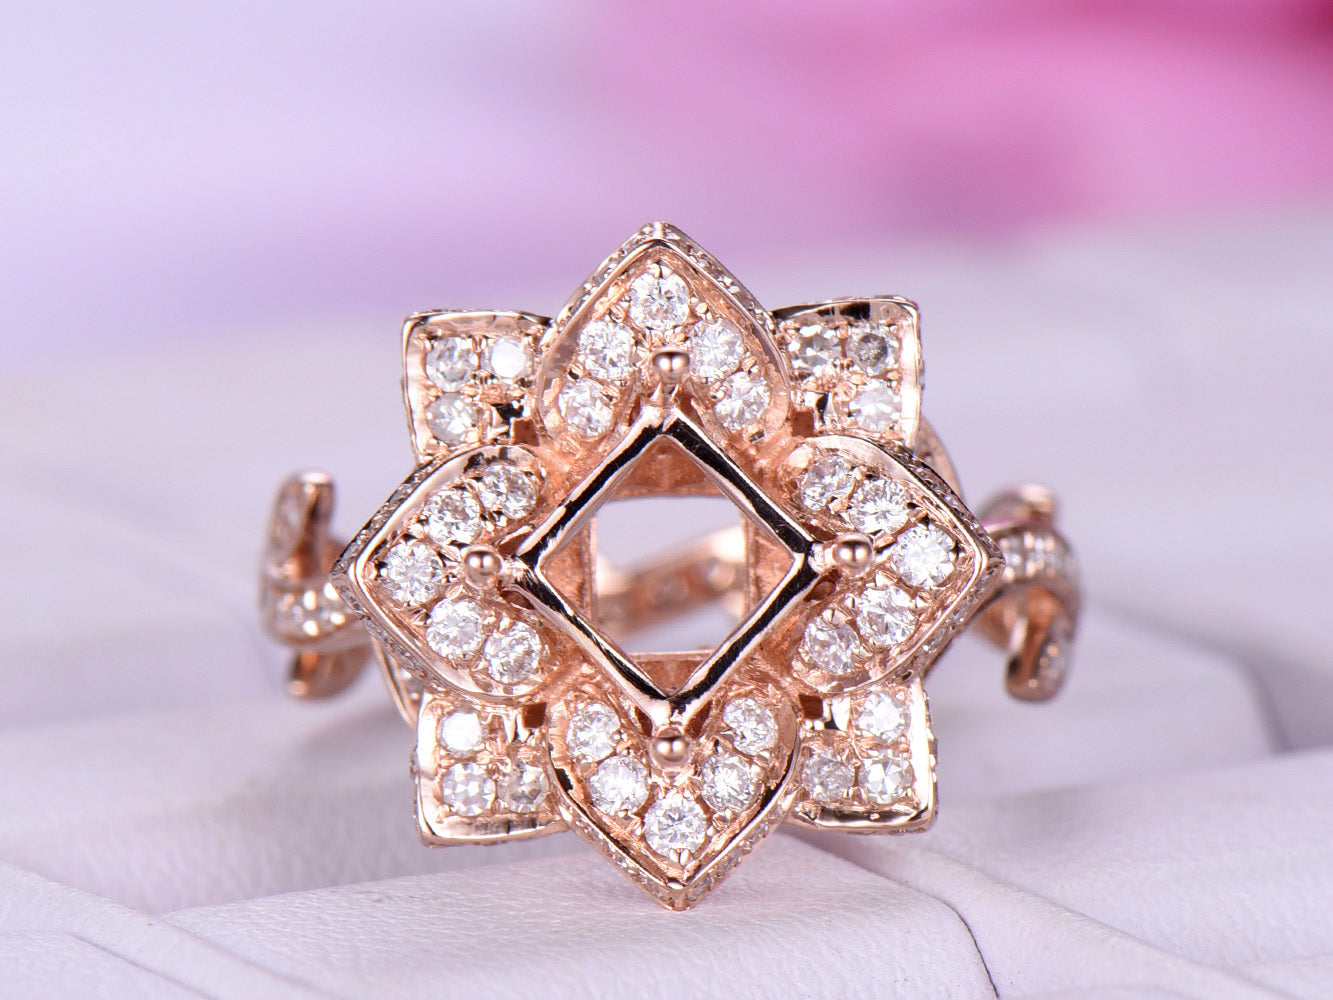 Reserved for AAA Diamond Flora Semi Mount Ring 14K Rose Gold Princess 6.5x6.5mm